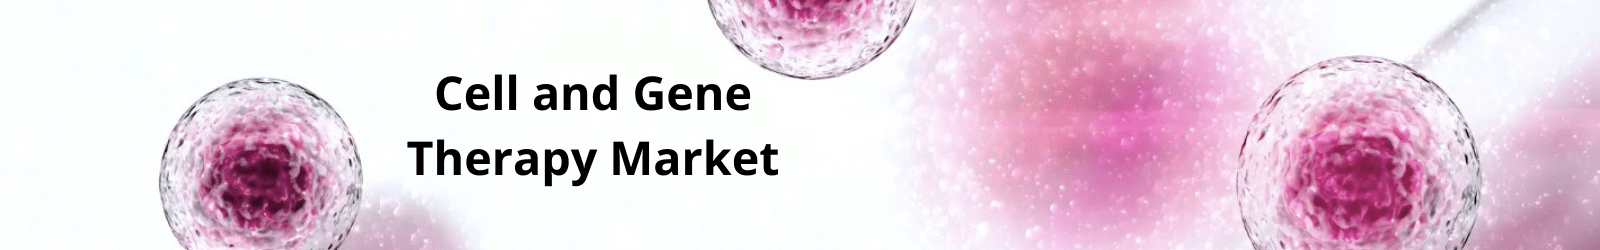 Cell and Gene Therapy Market Header